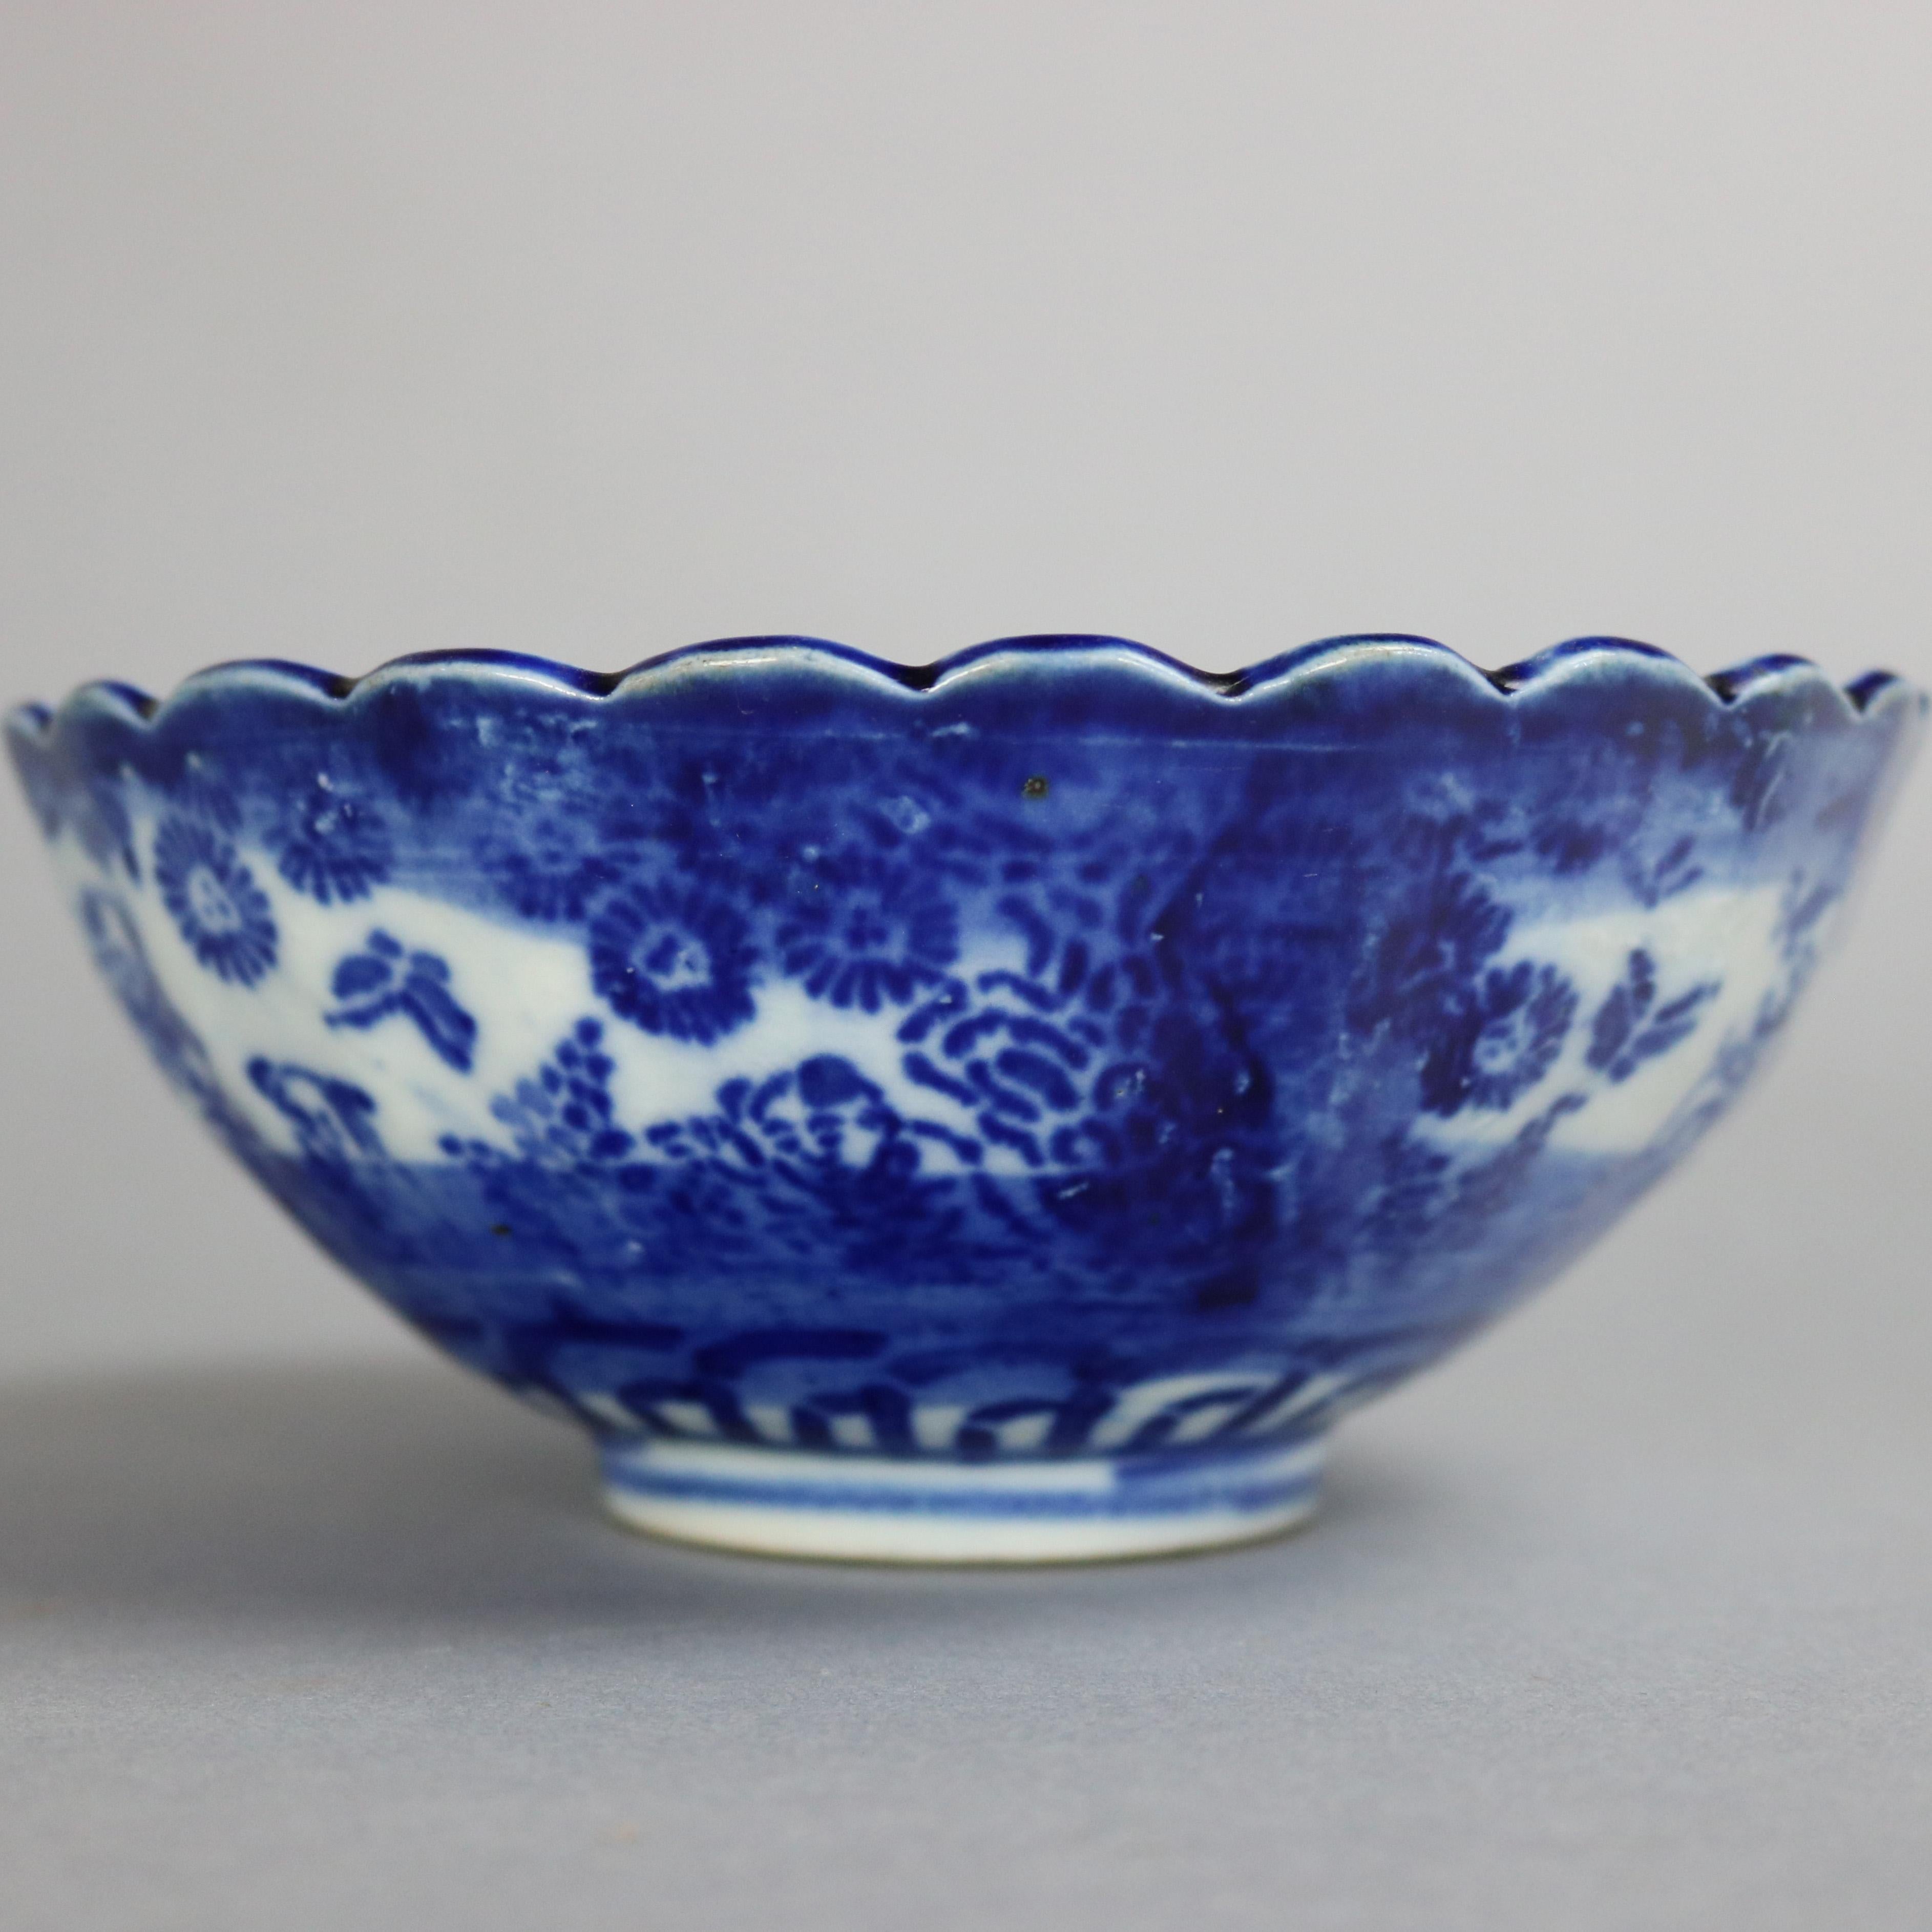 Fired Antique Chinese Canton Blue and White Porcelain Bowl, 19th Century